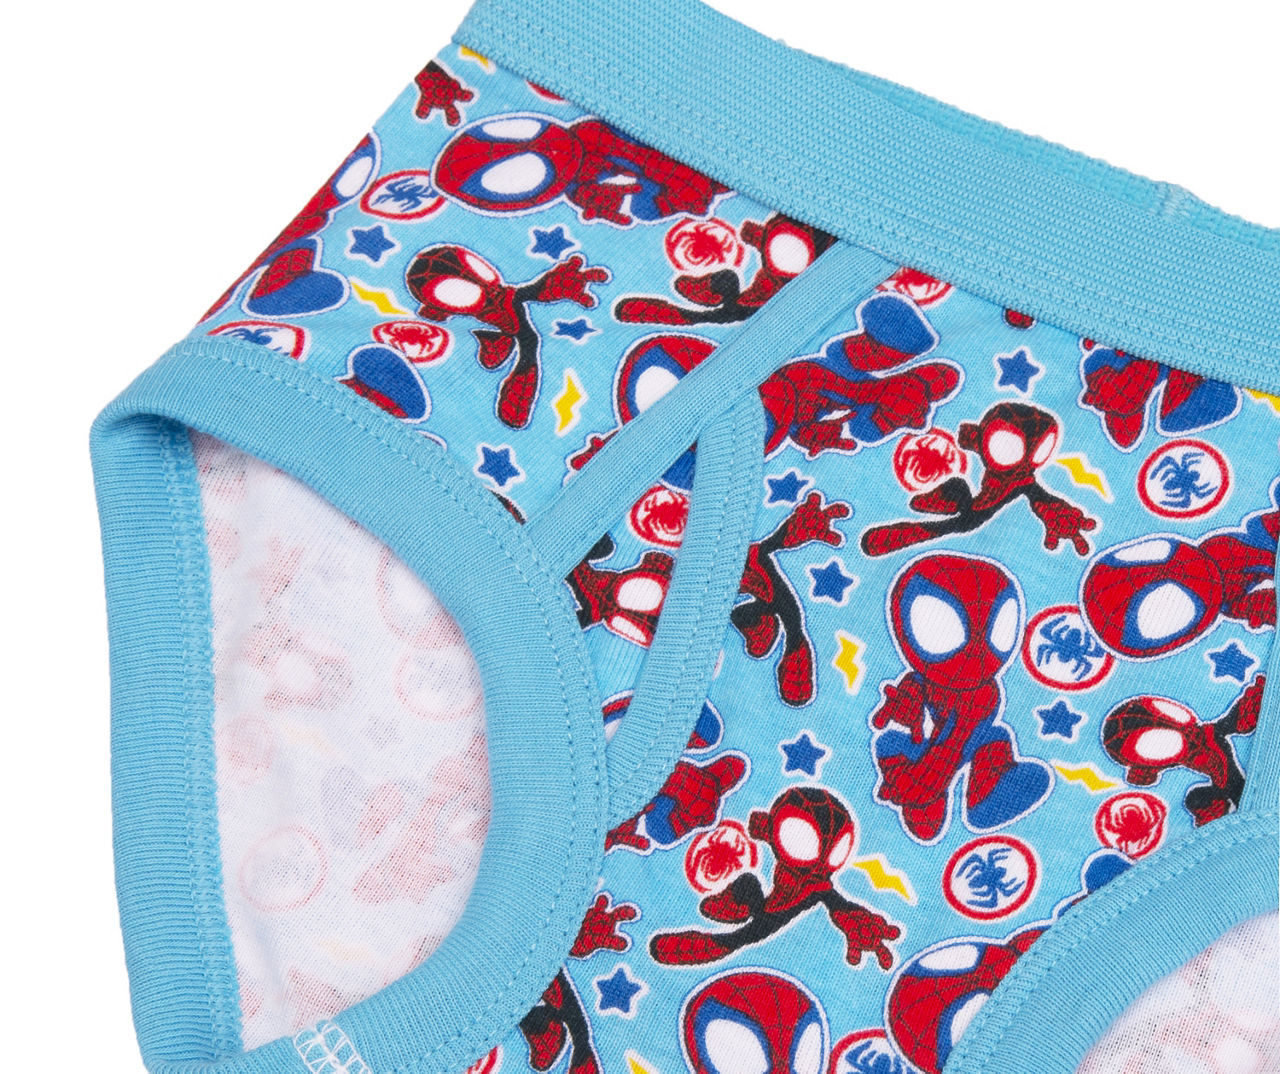 Toddler Size 4T White, Red & Blue Chibi Spidey Briefs With Coloring Page,  5-Pack